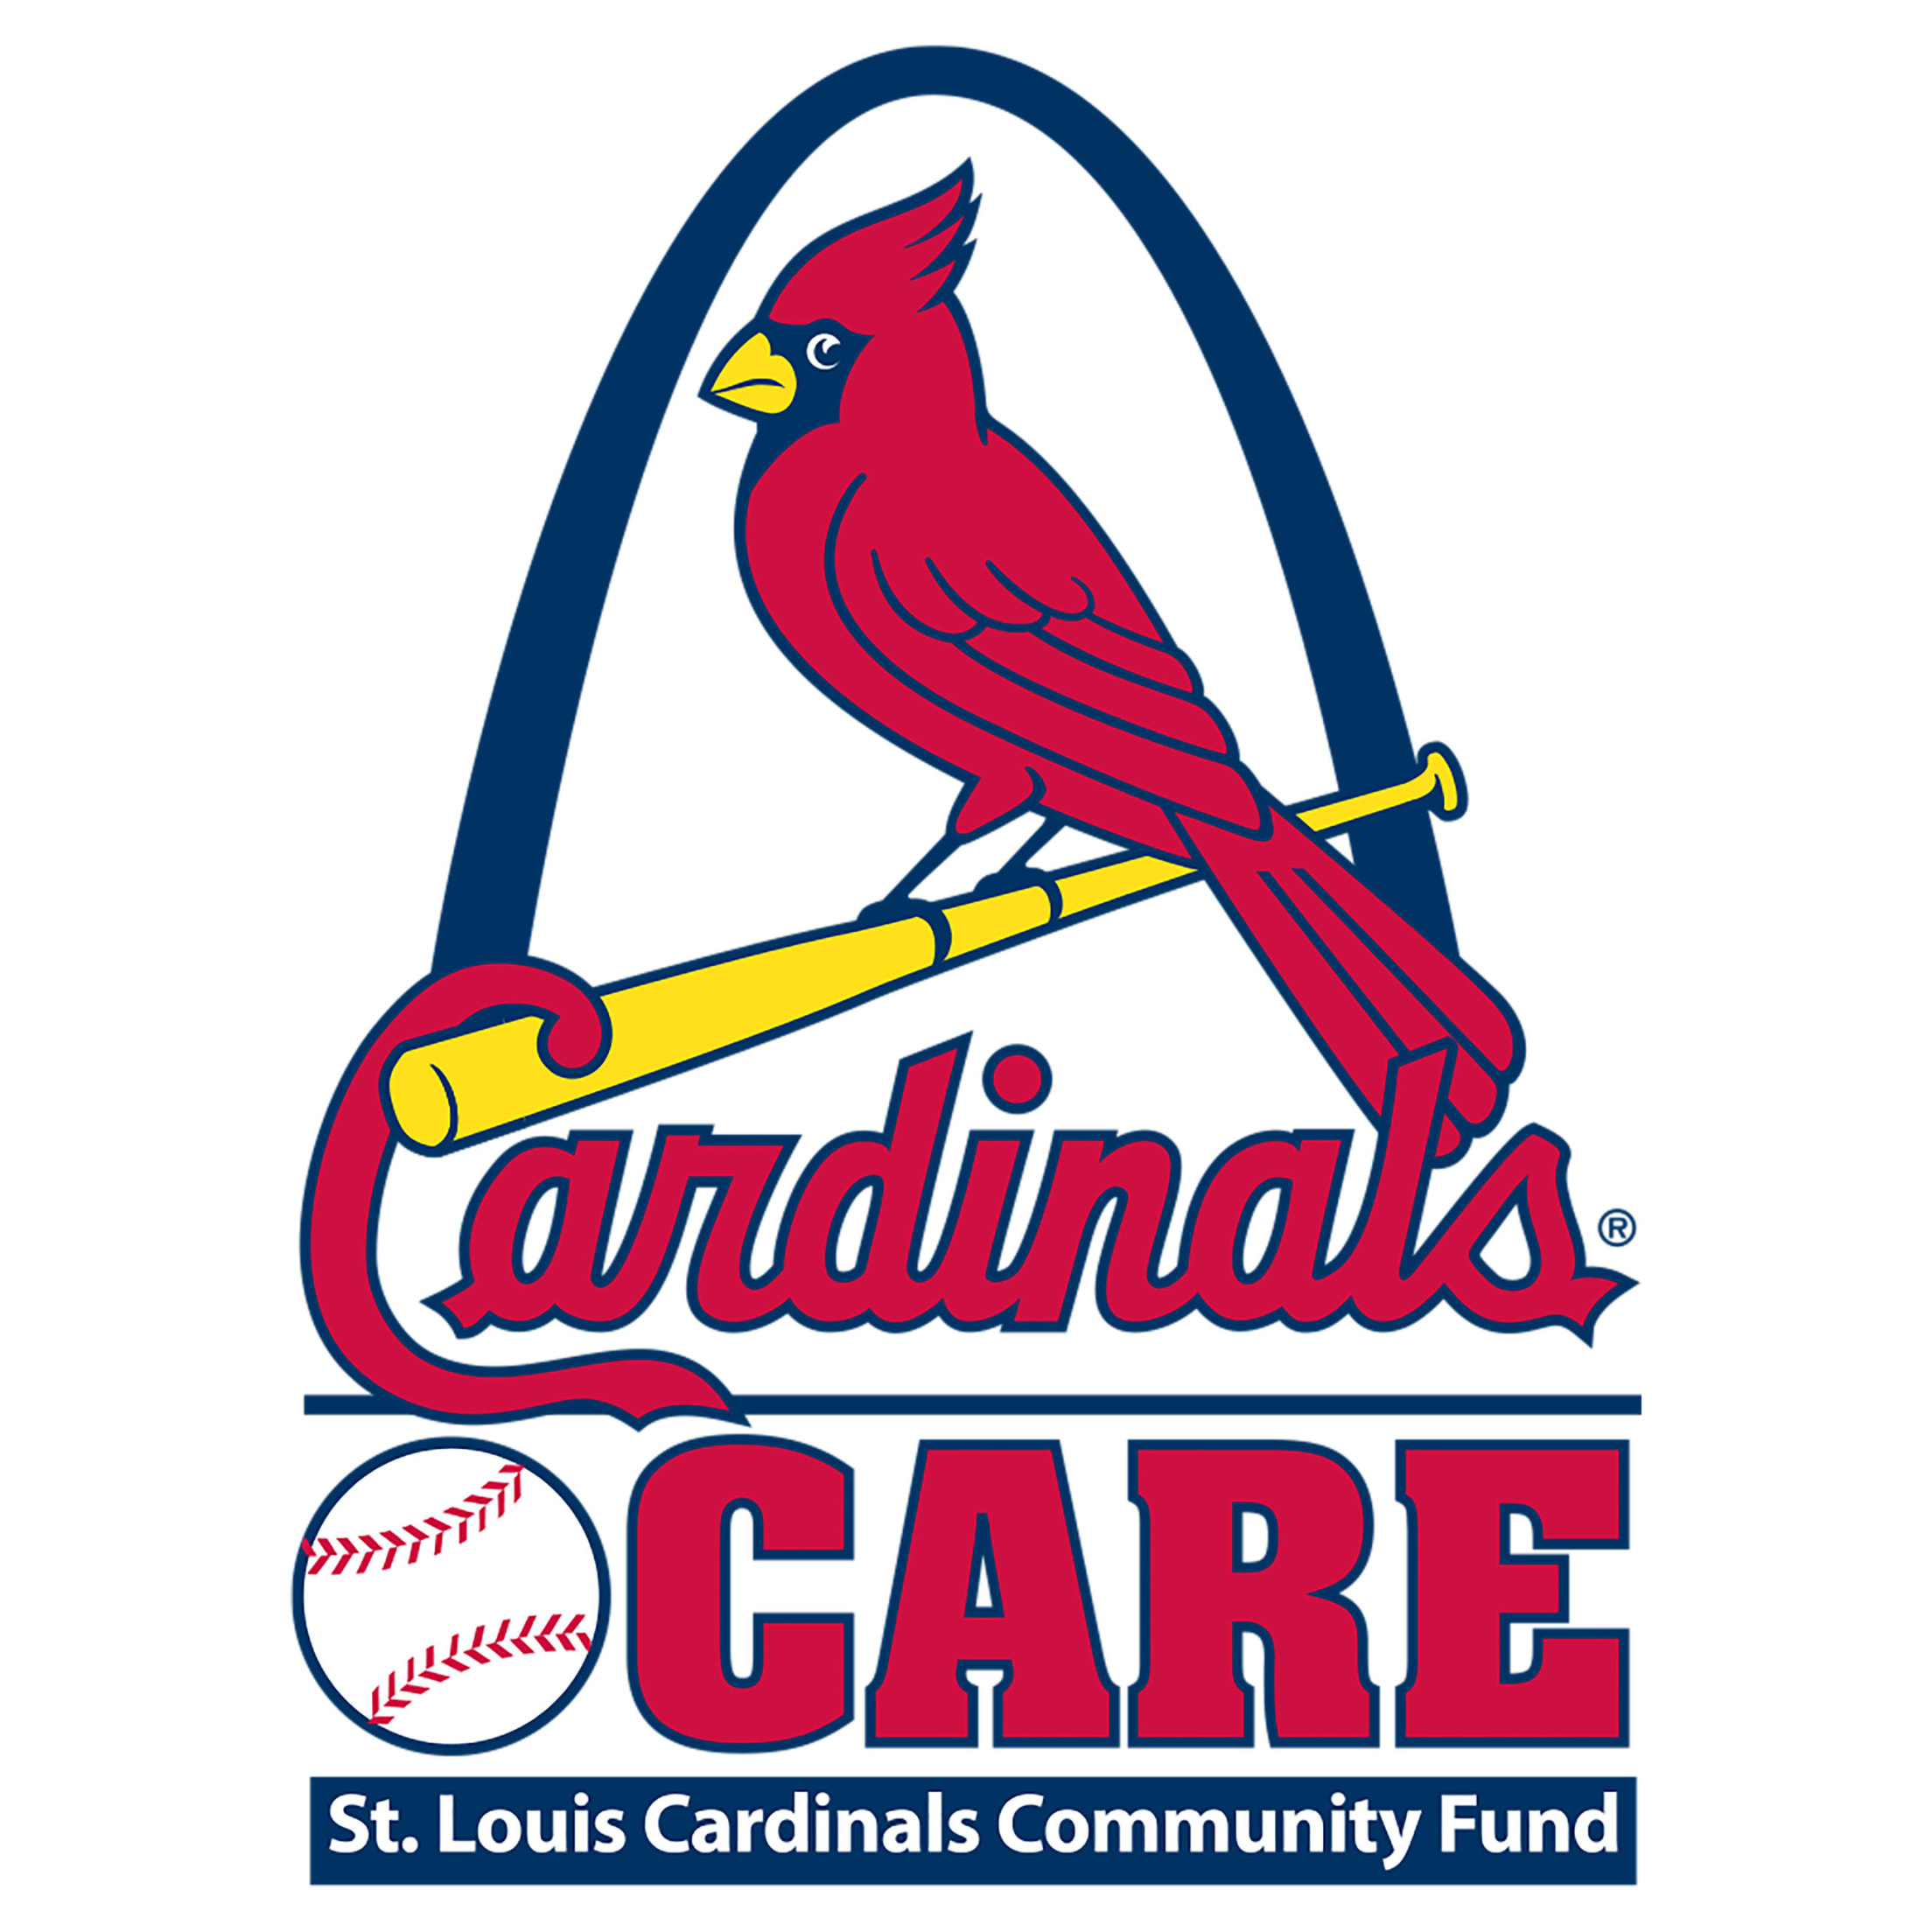 Reminder for First Responders! The - St. Louis Cardinals